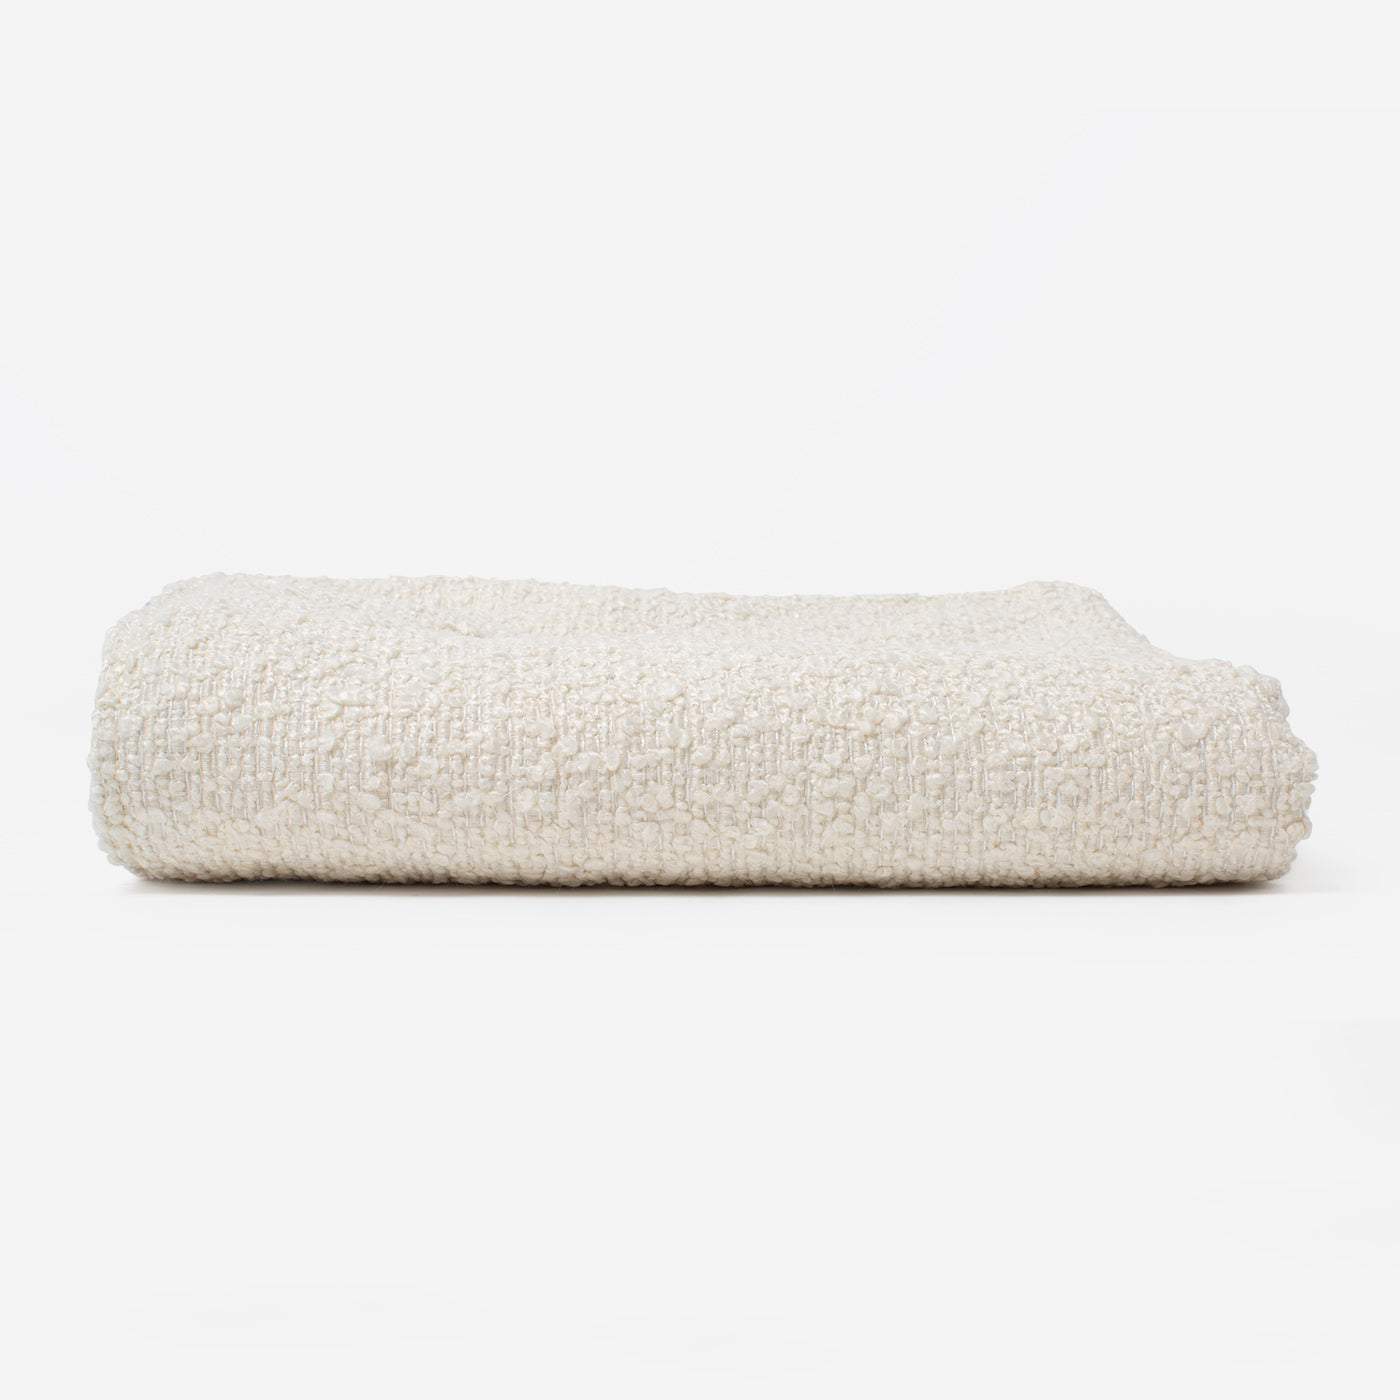 [colour:Ivory Boucle] Super Soft Sherpa & Teddy Fleece Lining, Our Luxury Cat & Kitten Blanket In Stunning Ivory Boucle I The Perfect Cat Bed Accessory! Available To Personalise at Lords & Labradors